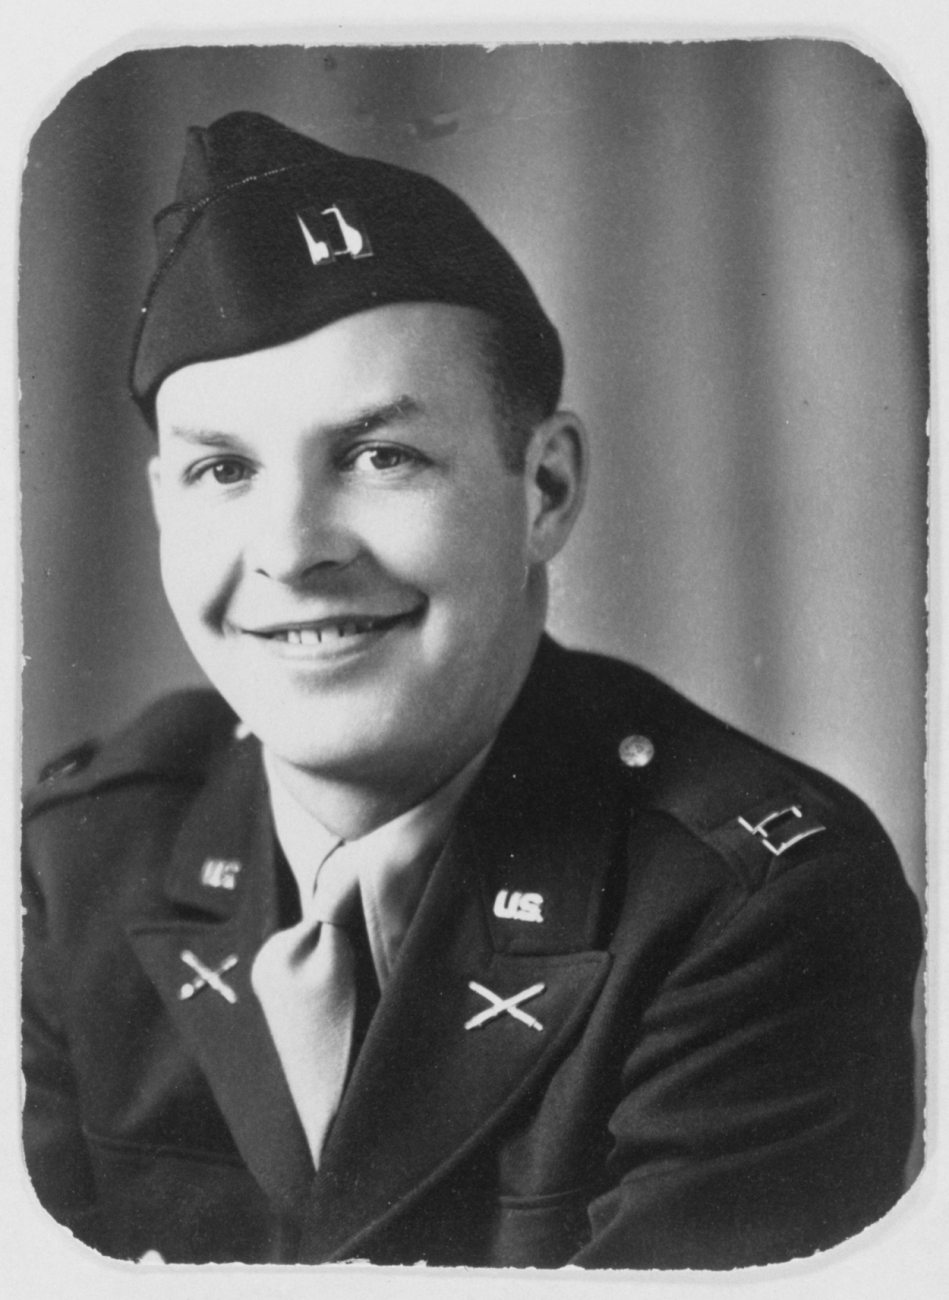 Army Captain Marvin Paulson after being transferred to United States Army in1945